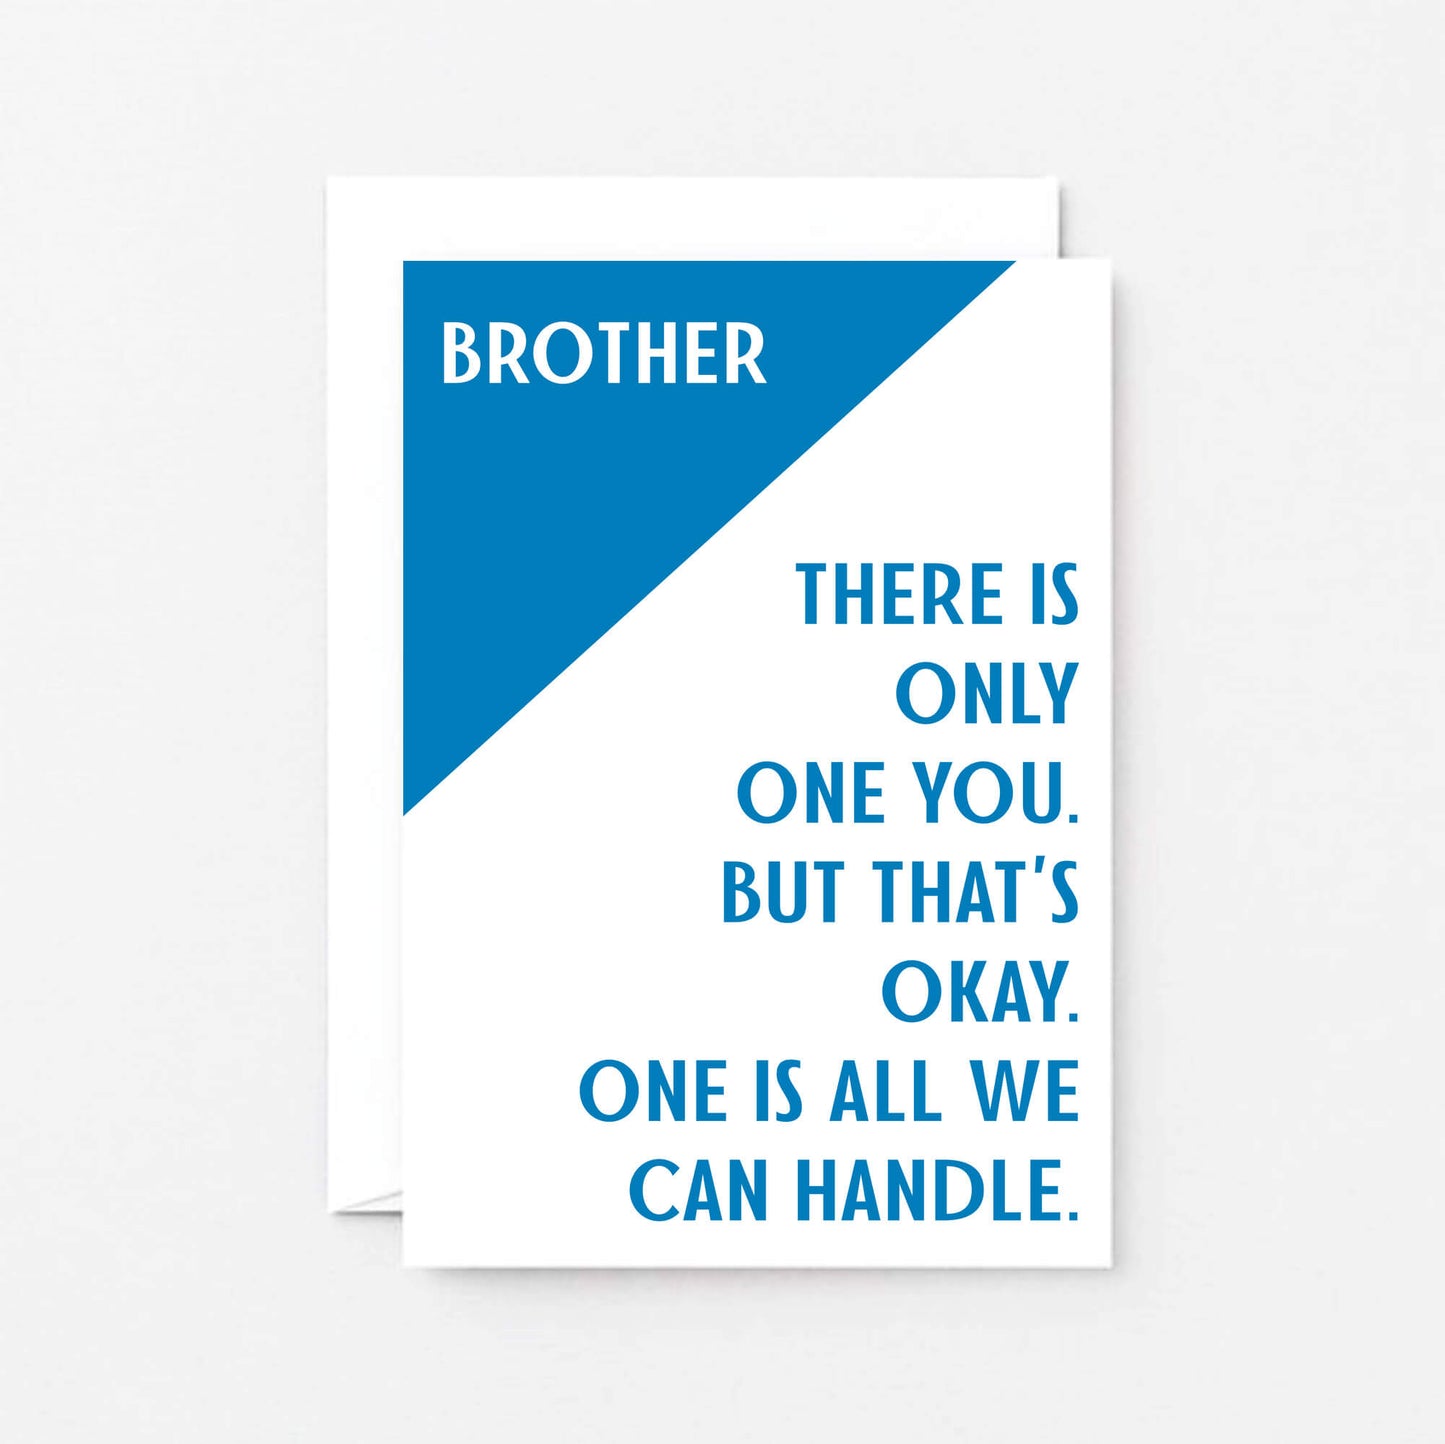 Brother Card by SixElevenCreations. Reads Brother There is only one you. But that's okay. One is all we can handle. Product Code SE3041A6